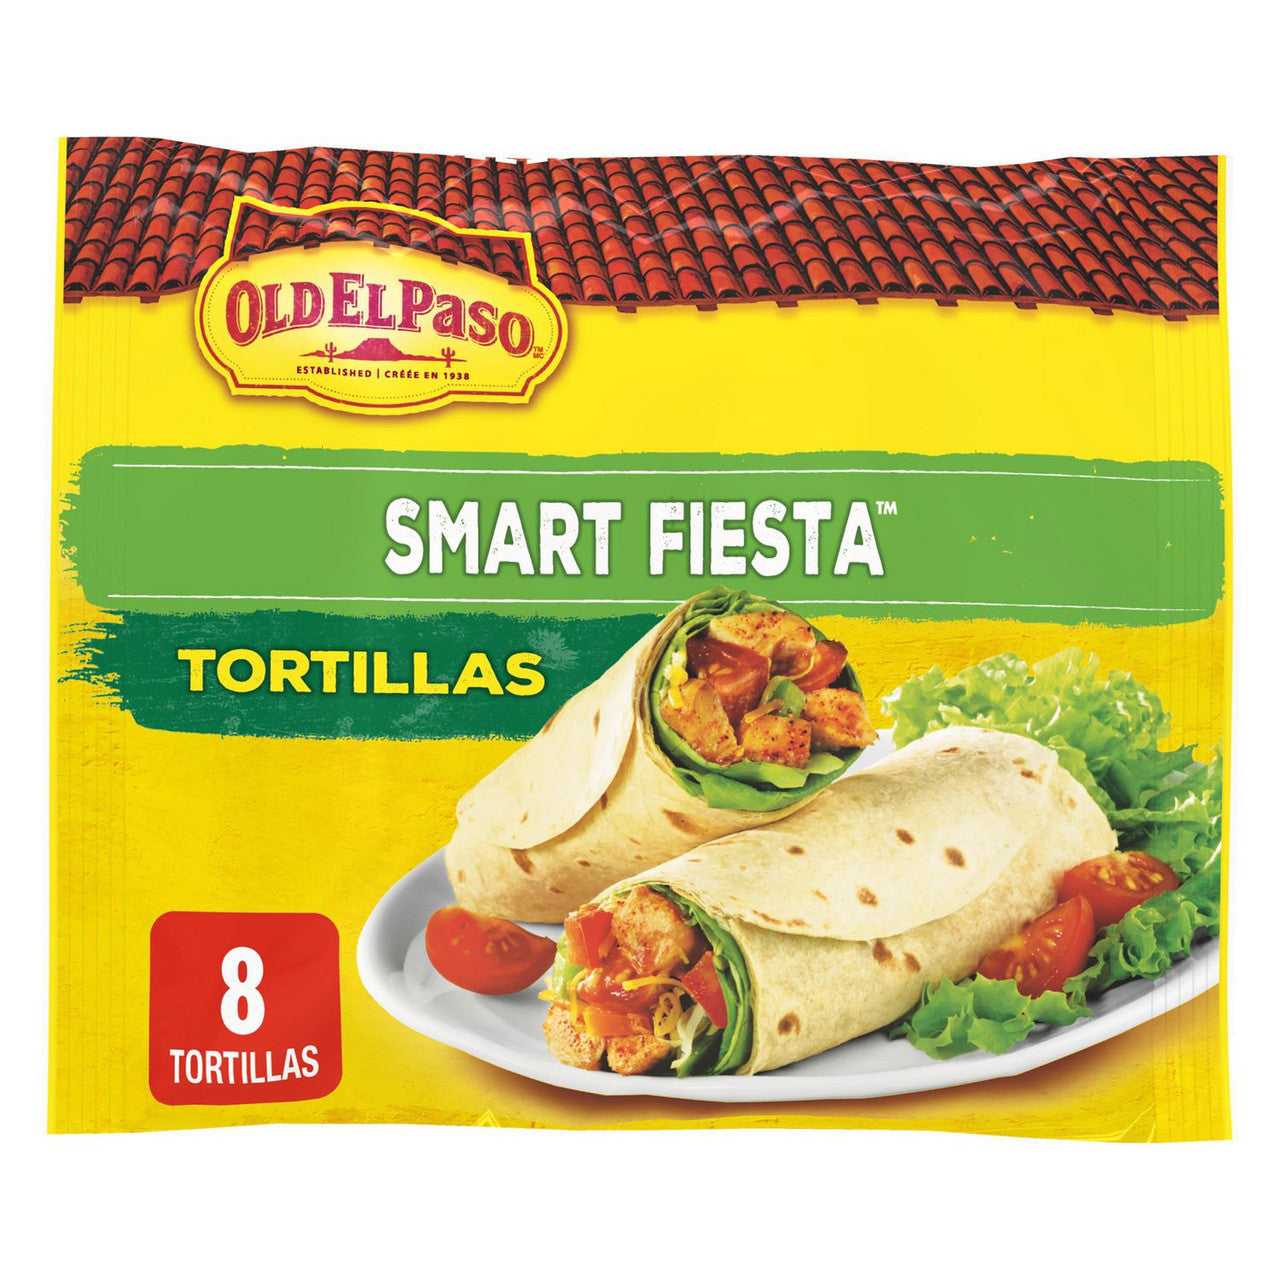 Old El Paso Smart Fiesta Tortillas, Pack of 8, 311g/11 oz., {Imported from Canada}